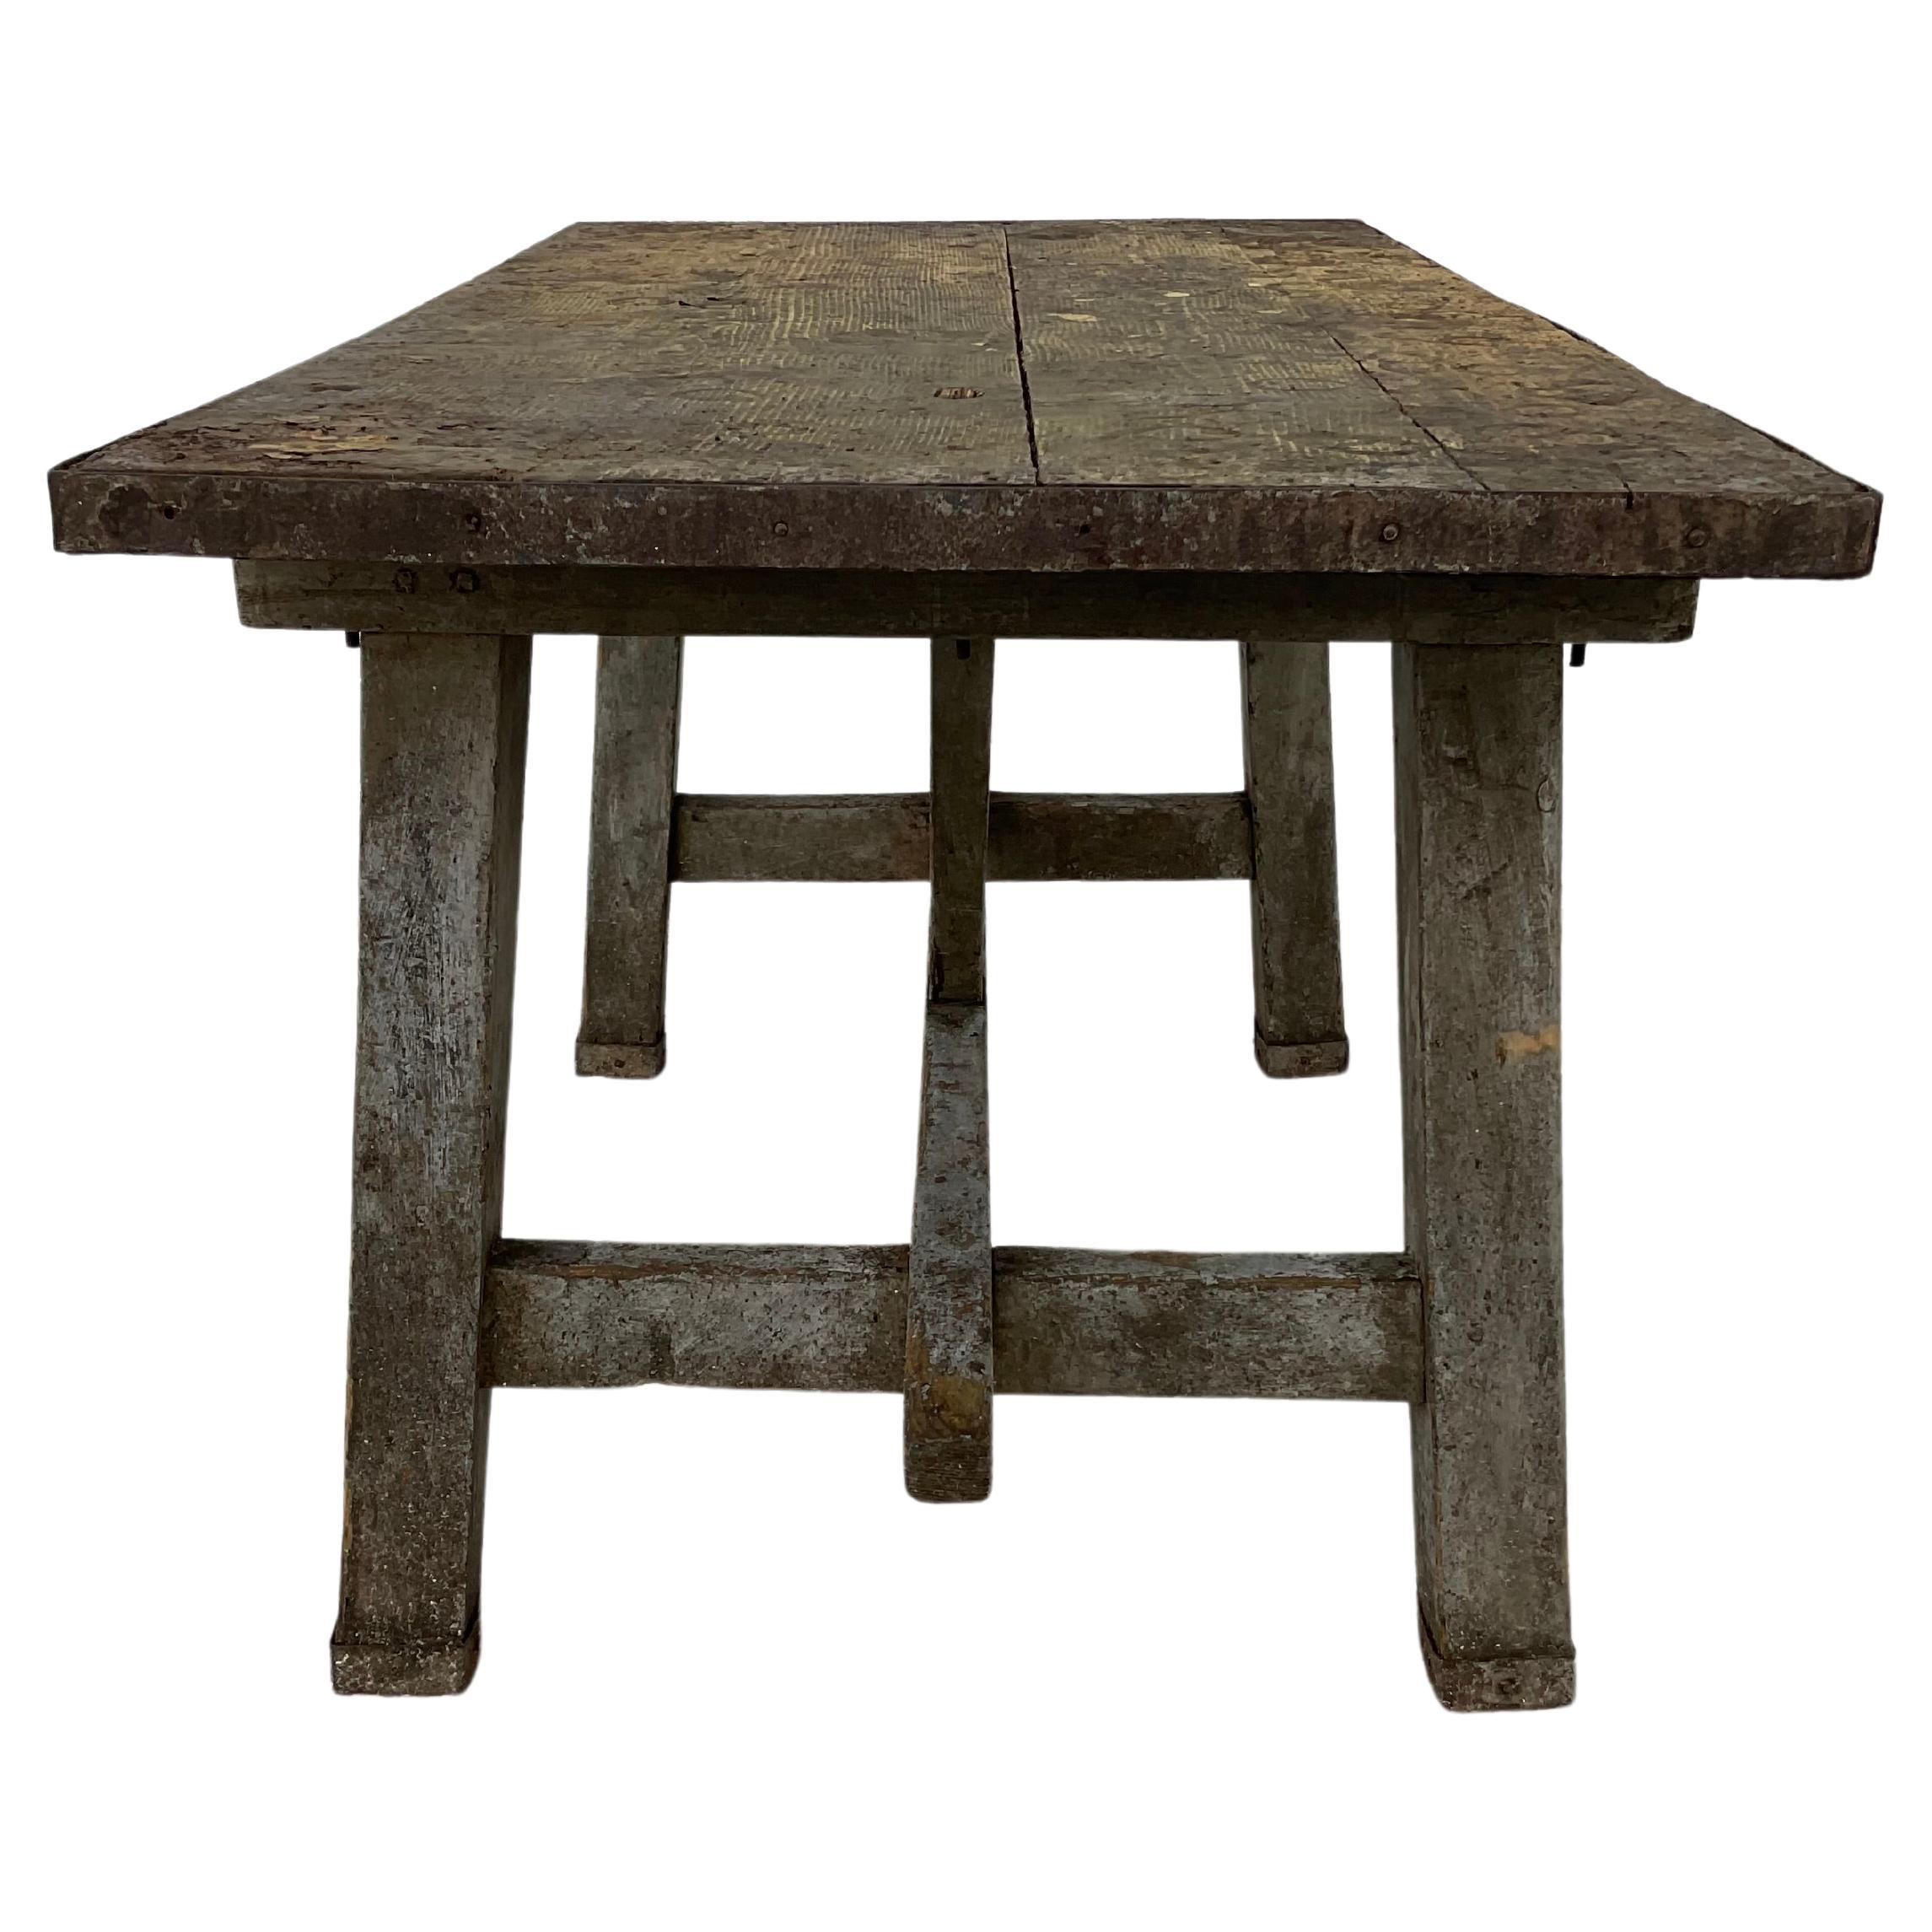 Wood 19th Century French Rustic Industrial Dining or Writing Table or Desk For Sale